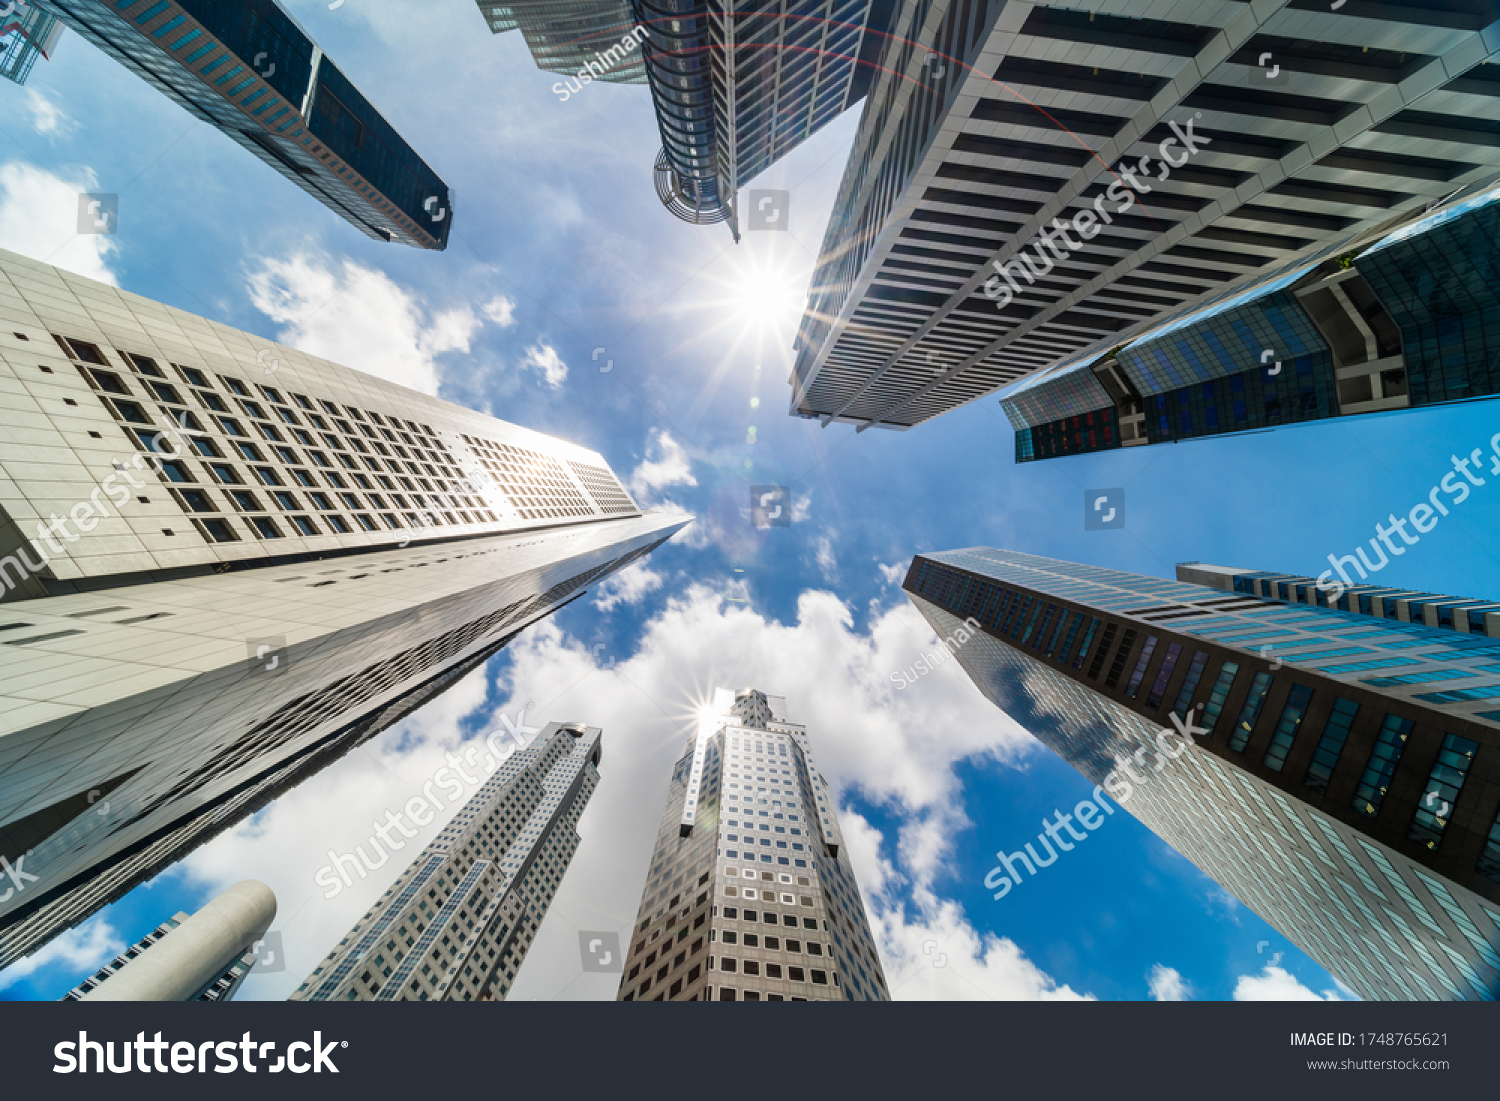 Skyscraper tower buildings in business district, Singapore city. Cloud and sun flares on sunny day sky. Low angle view. Asia financial economy, merger & acquisition, or modern architecture concept #1748765621